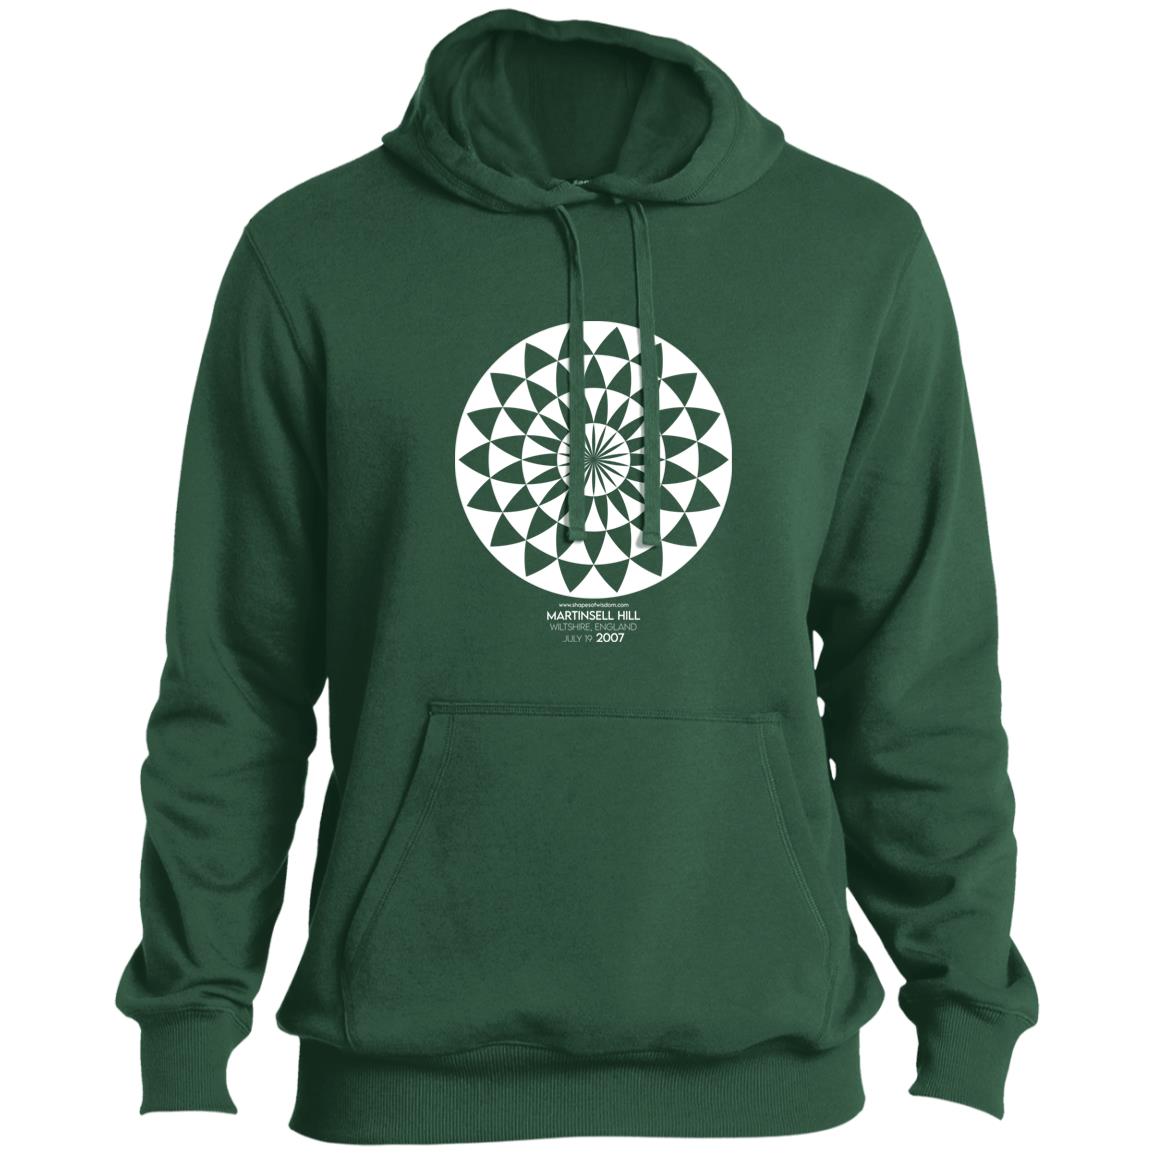 Crop Circle Pullover Hoodie - Martinsell Hill 4